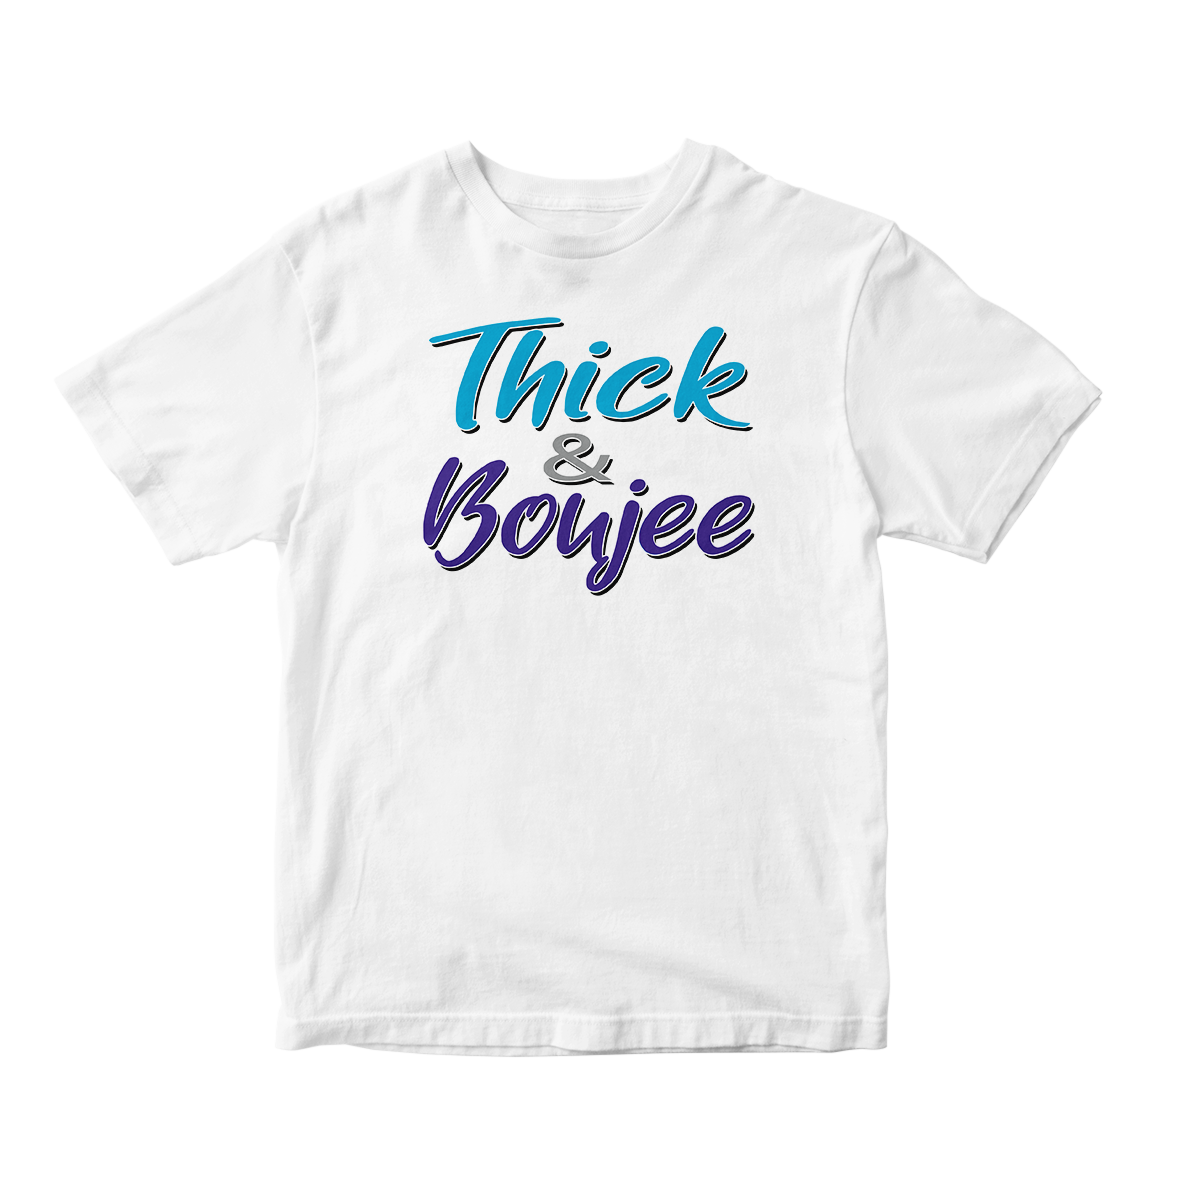 Thick & Boujee in White Aqua CW Short Sleeve Tee